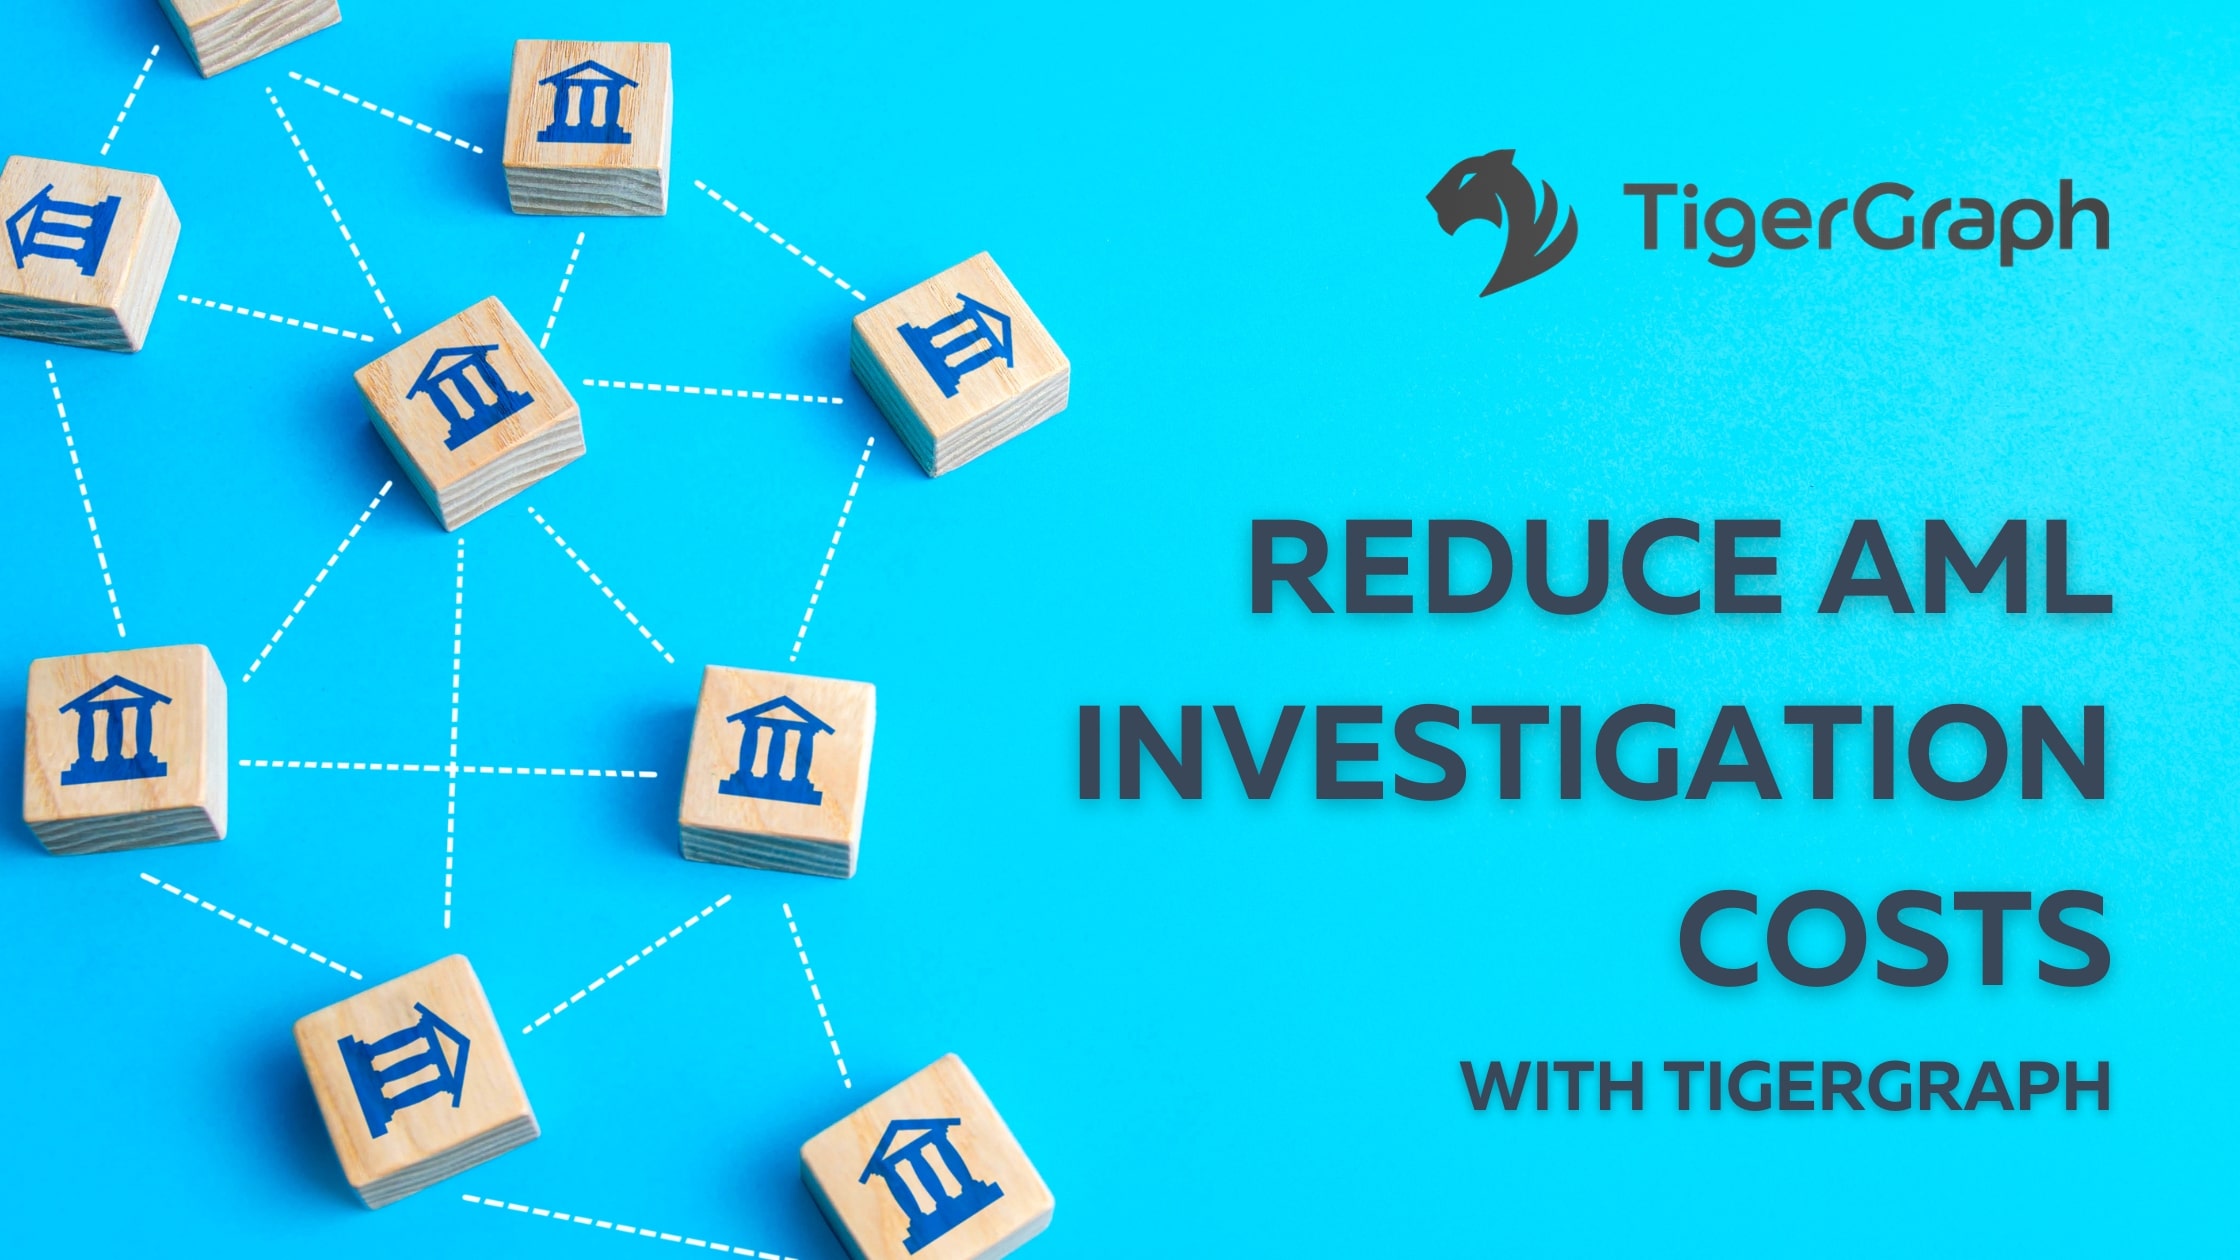 Reduce AML Investigation Costs with TigerGraph